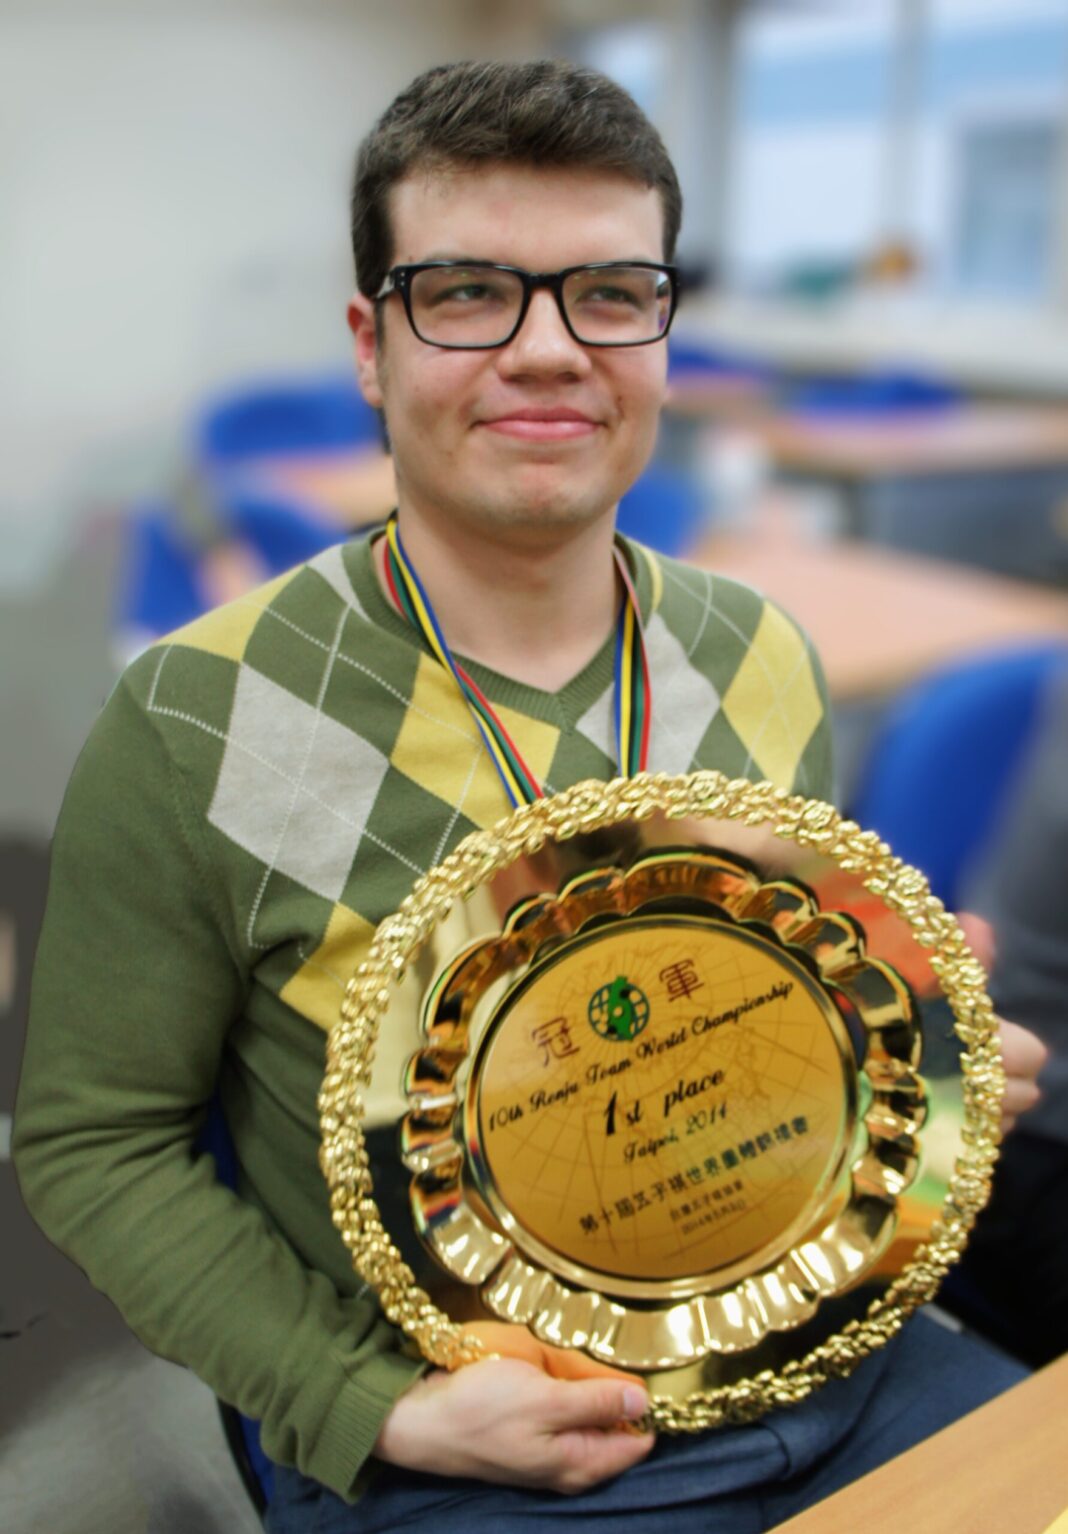 Image of Tunnet holding an award